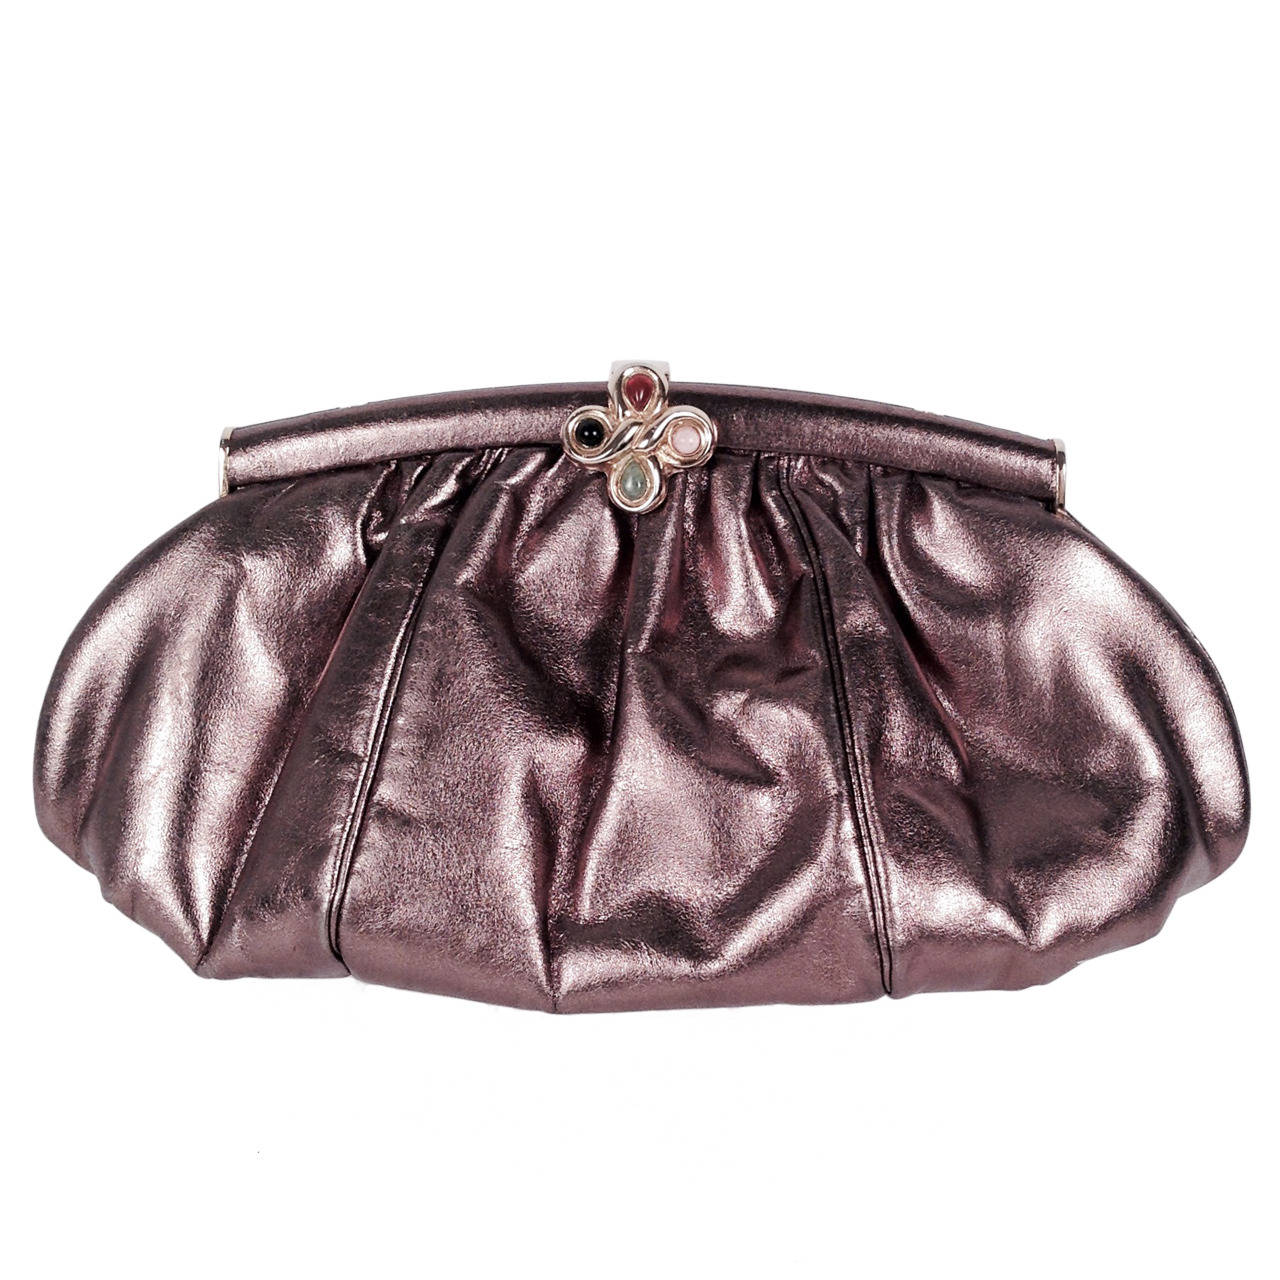 Vintage Judith Leiber Metallic Leather Evening Bag With Jeweled Clasp